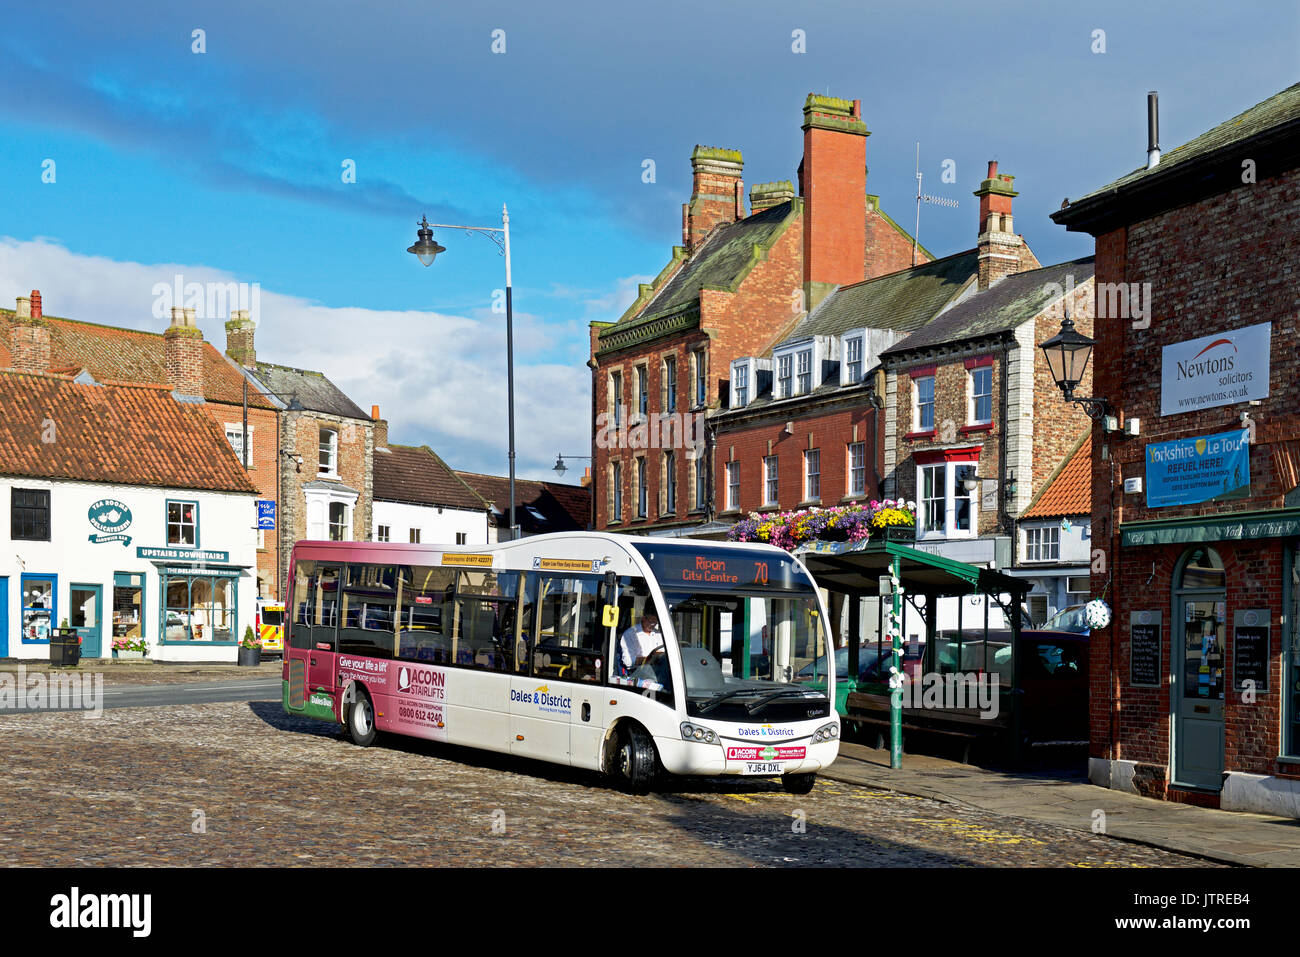 Bus in the market place, Thirsk, North Yorkshire, England UK Stock Photo